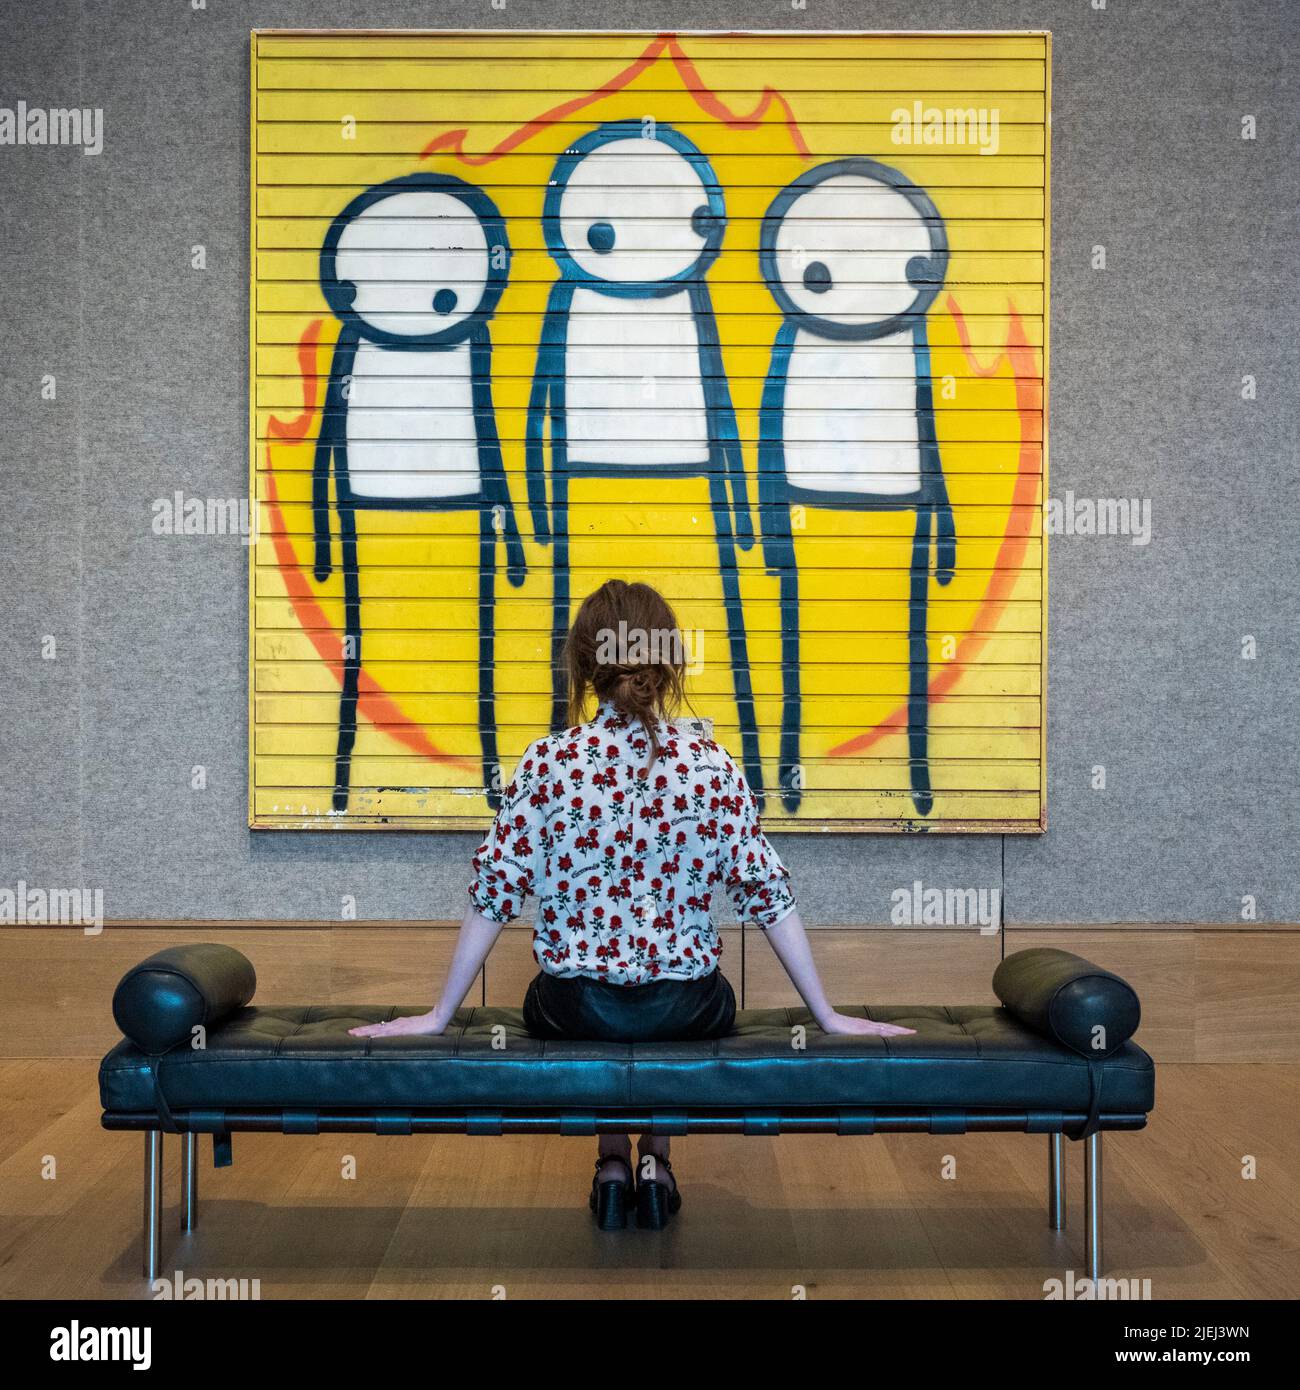 London, UK.  27 June 2022. A staff member views “Children of Fire”, 2011, by STIK (Est. £120,000 - £180,000) at a preview of Post-War and Contemporary Art sale.  The auction will take place on 30 June at Bonhams New Bond Street galleries.  Credit: Stephen Chung / Alamy Live News Stock Photo